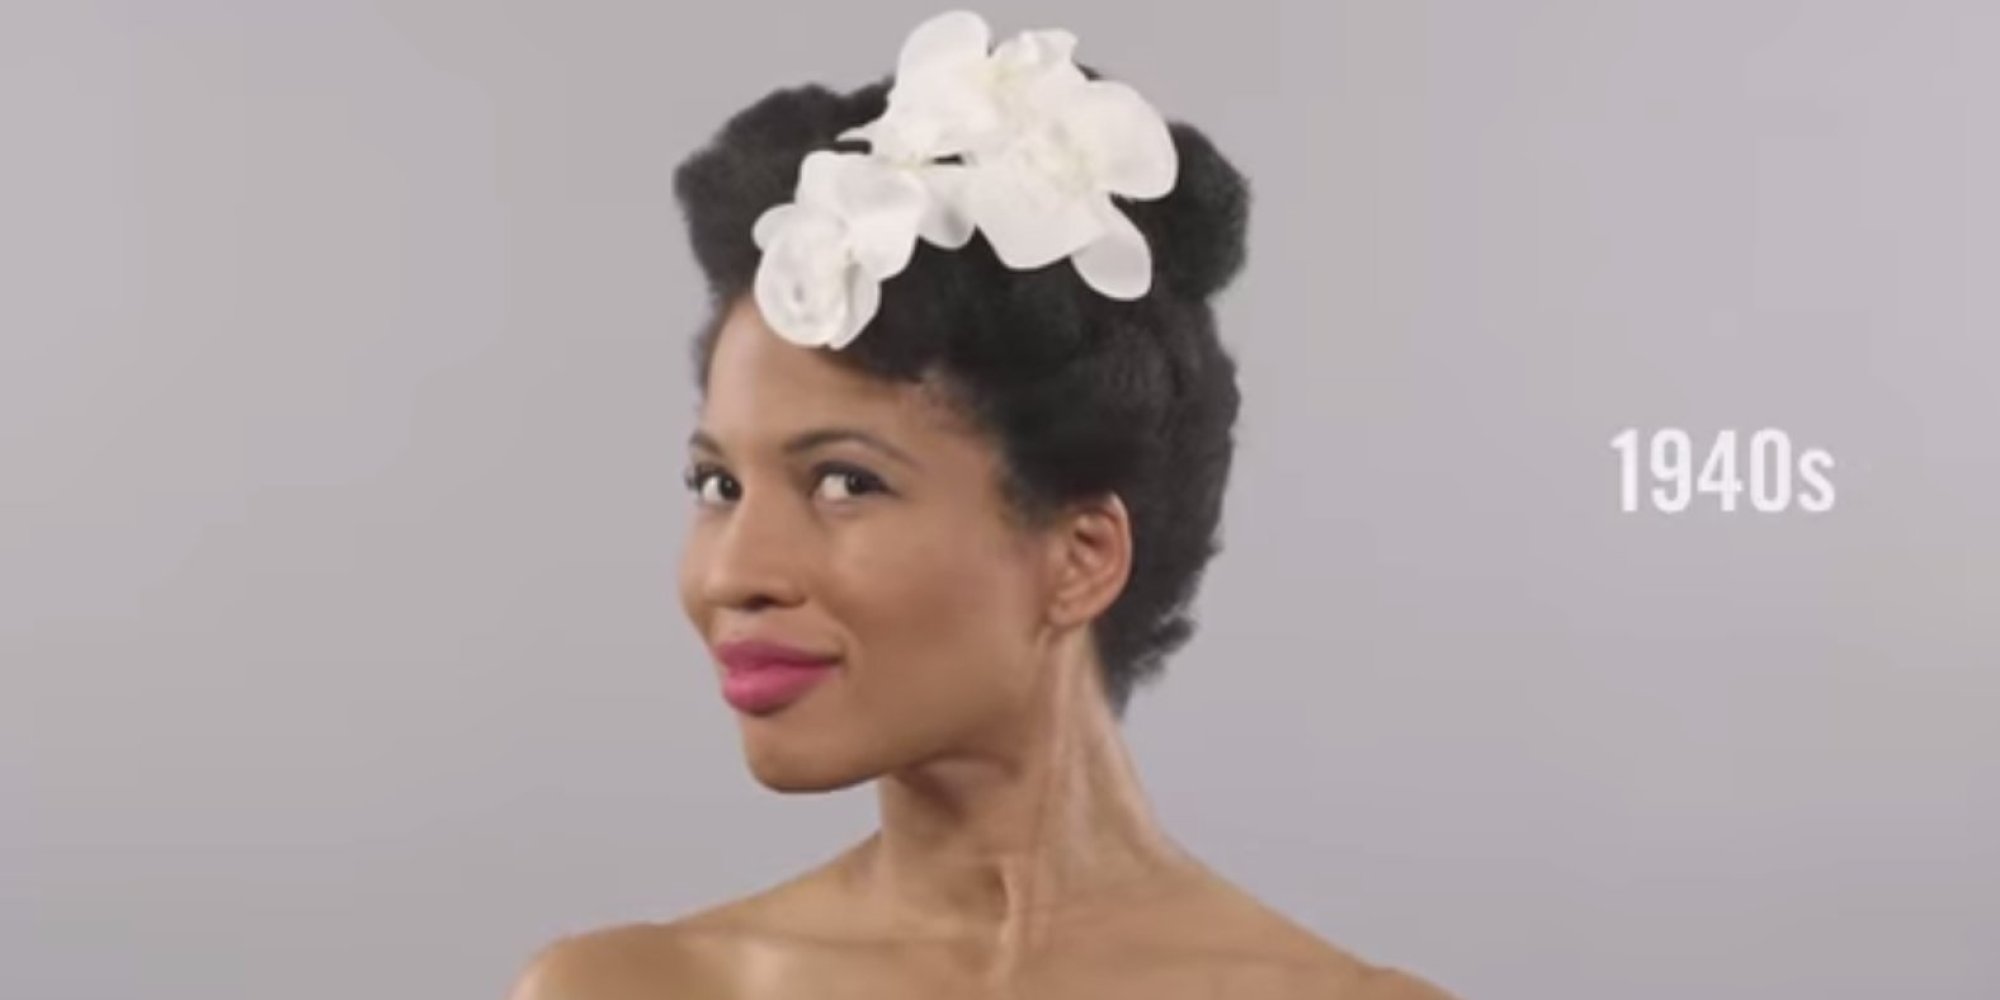 How Black Hair Has Changed In The Last 100 Years In A 1-Minute Video